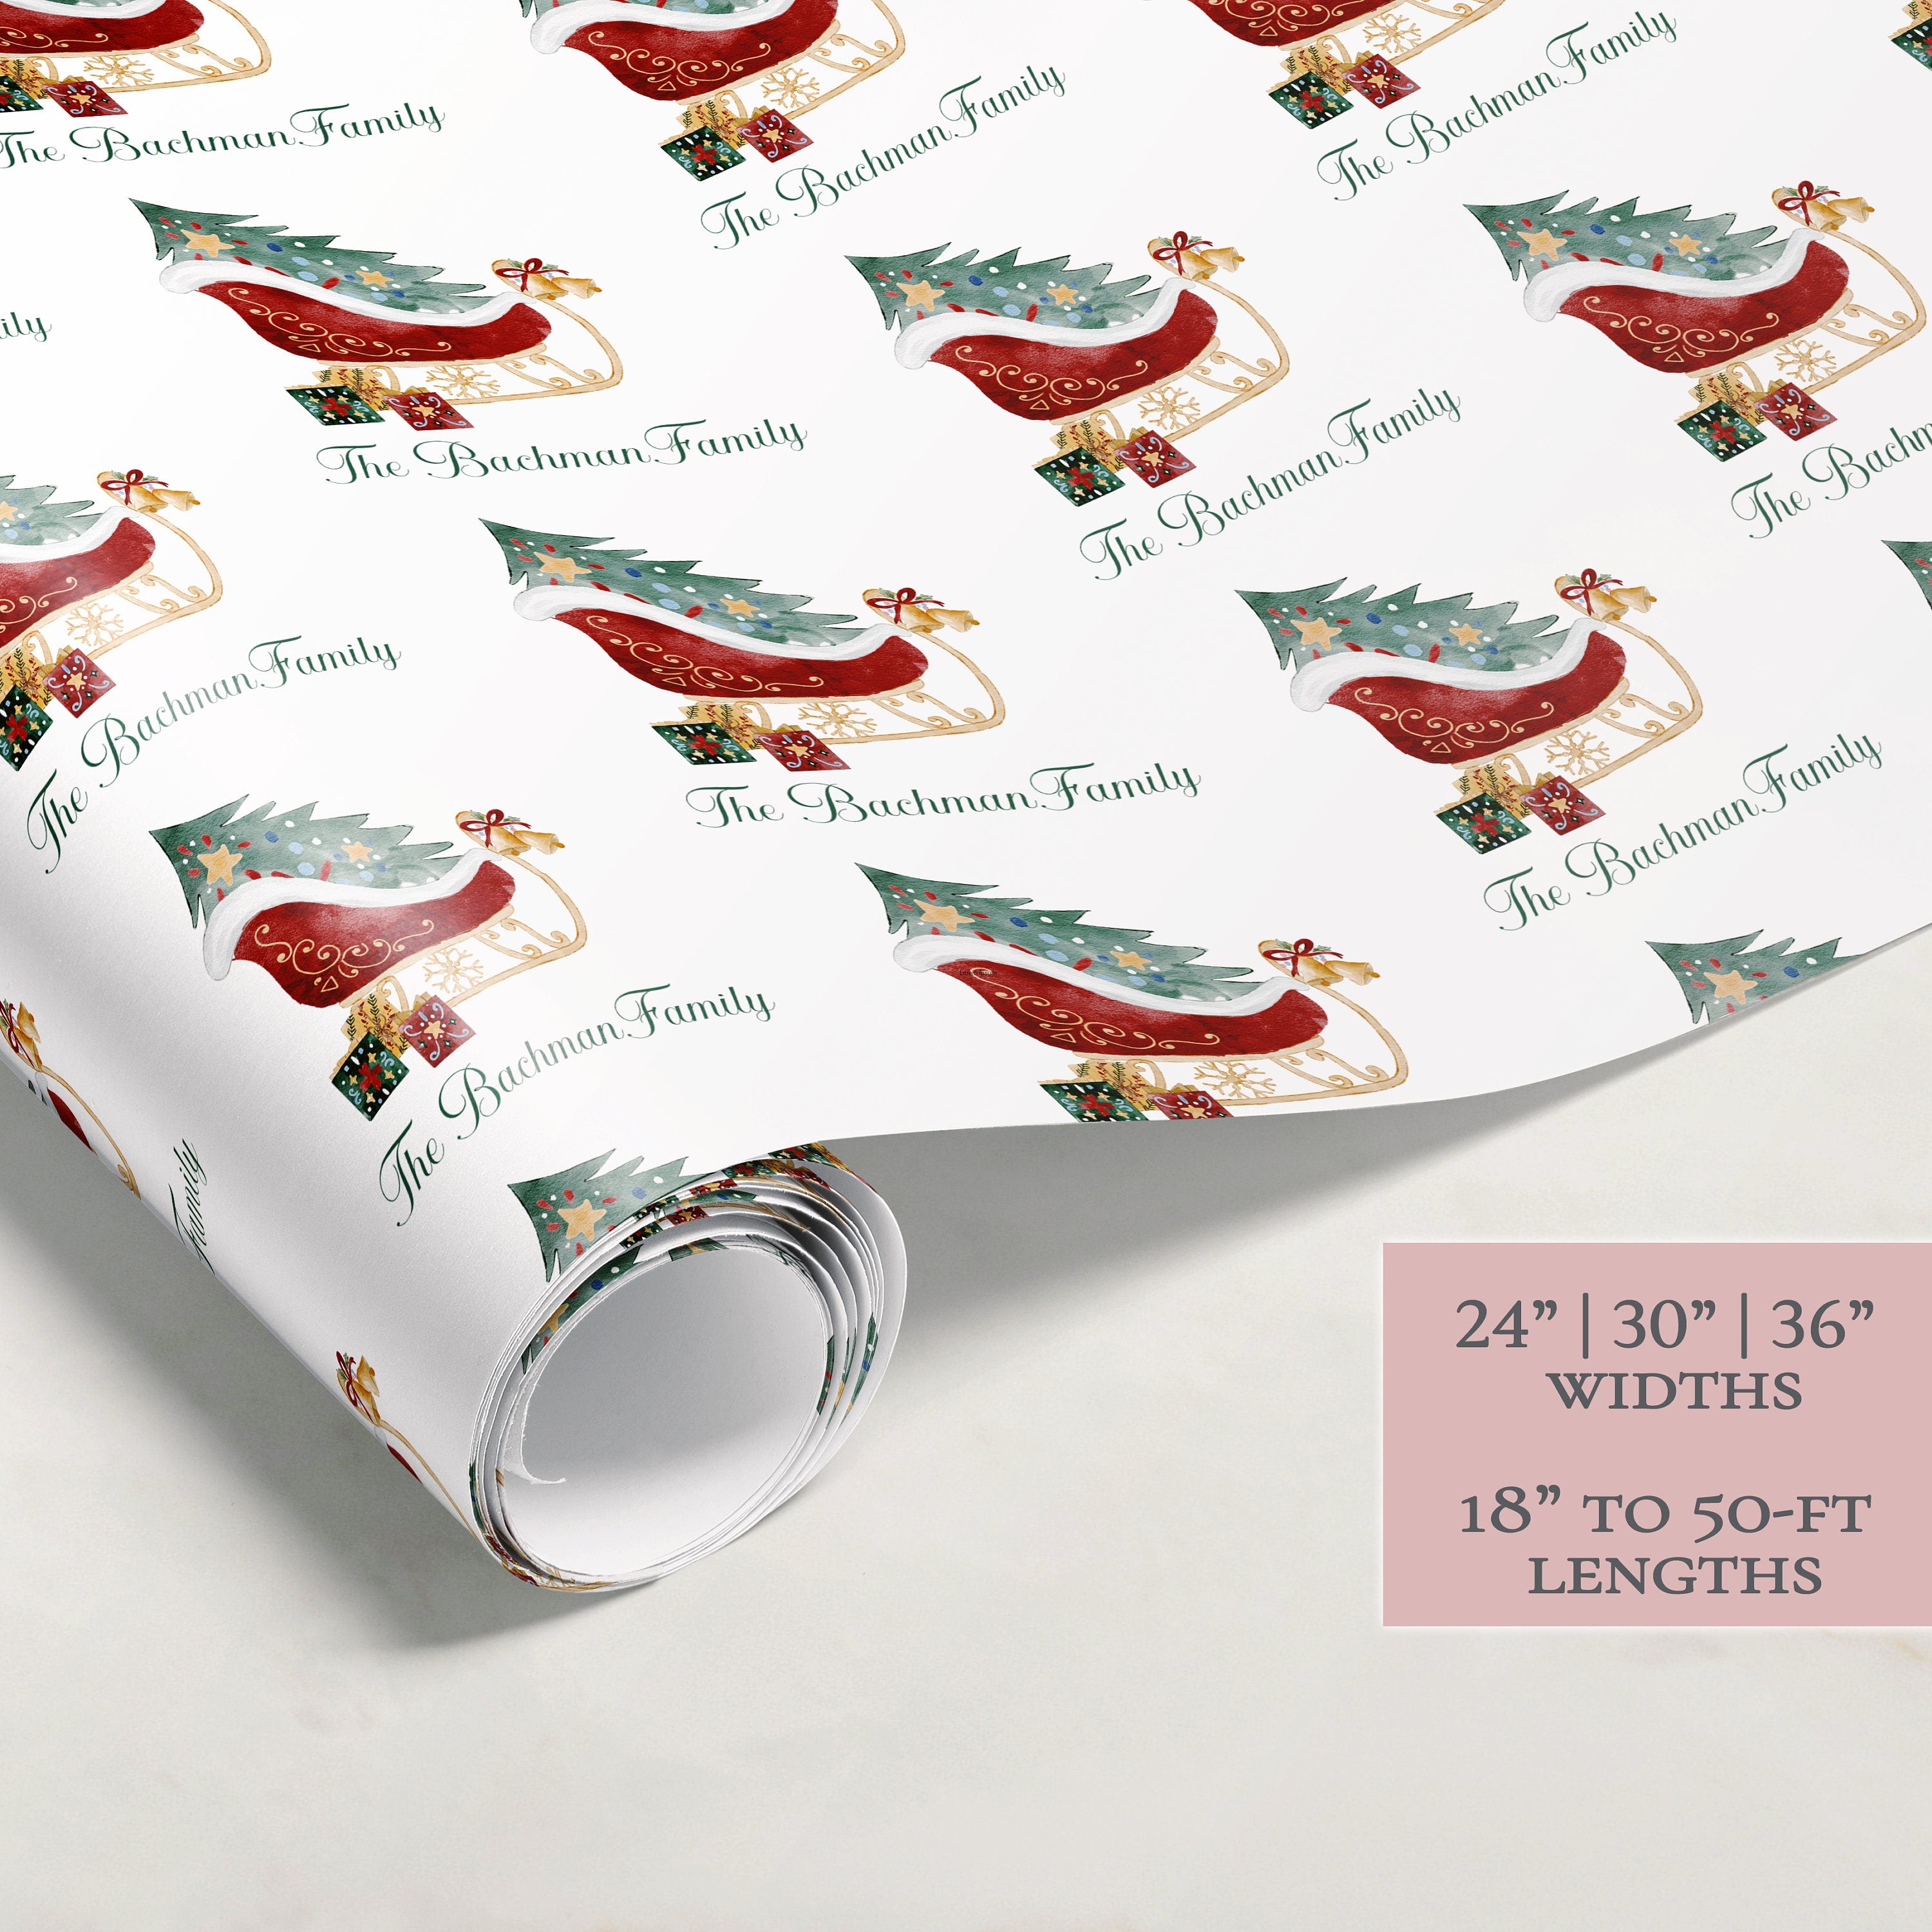 Gift Wrap My Face custom wrapping paper is perfect for the holidays